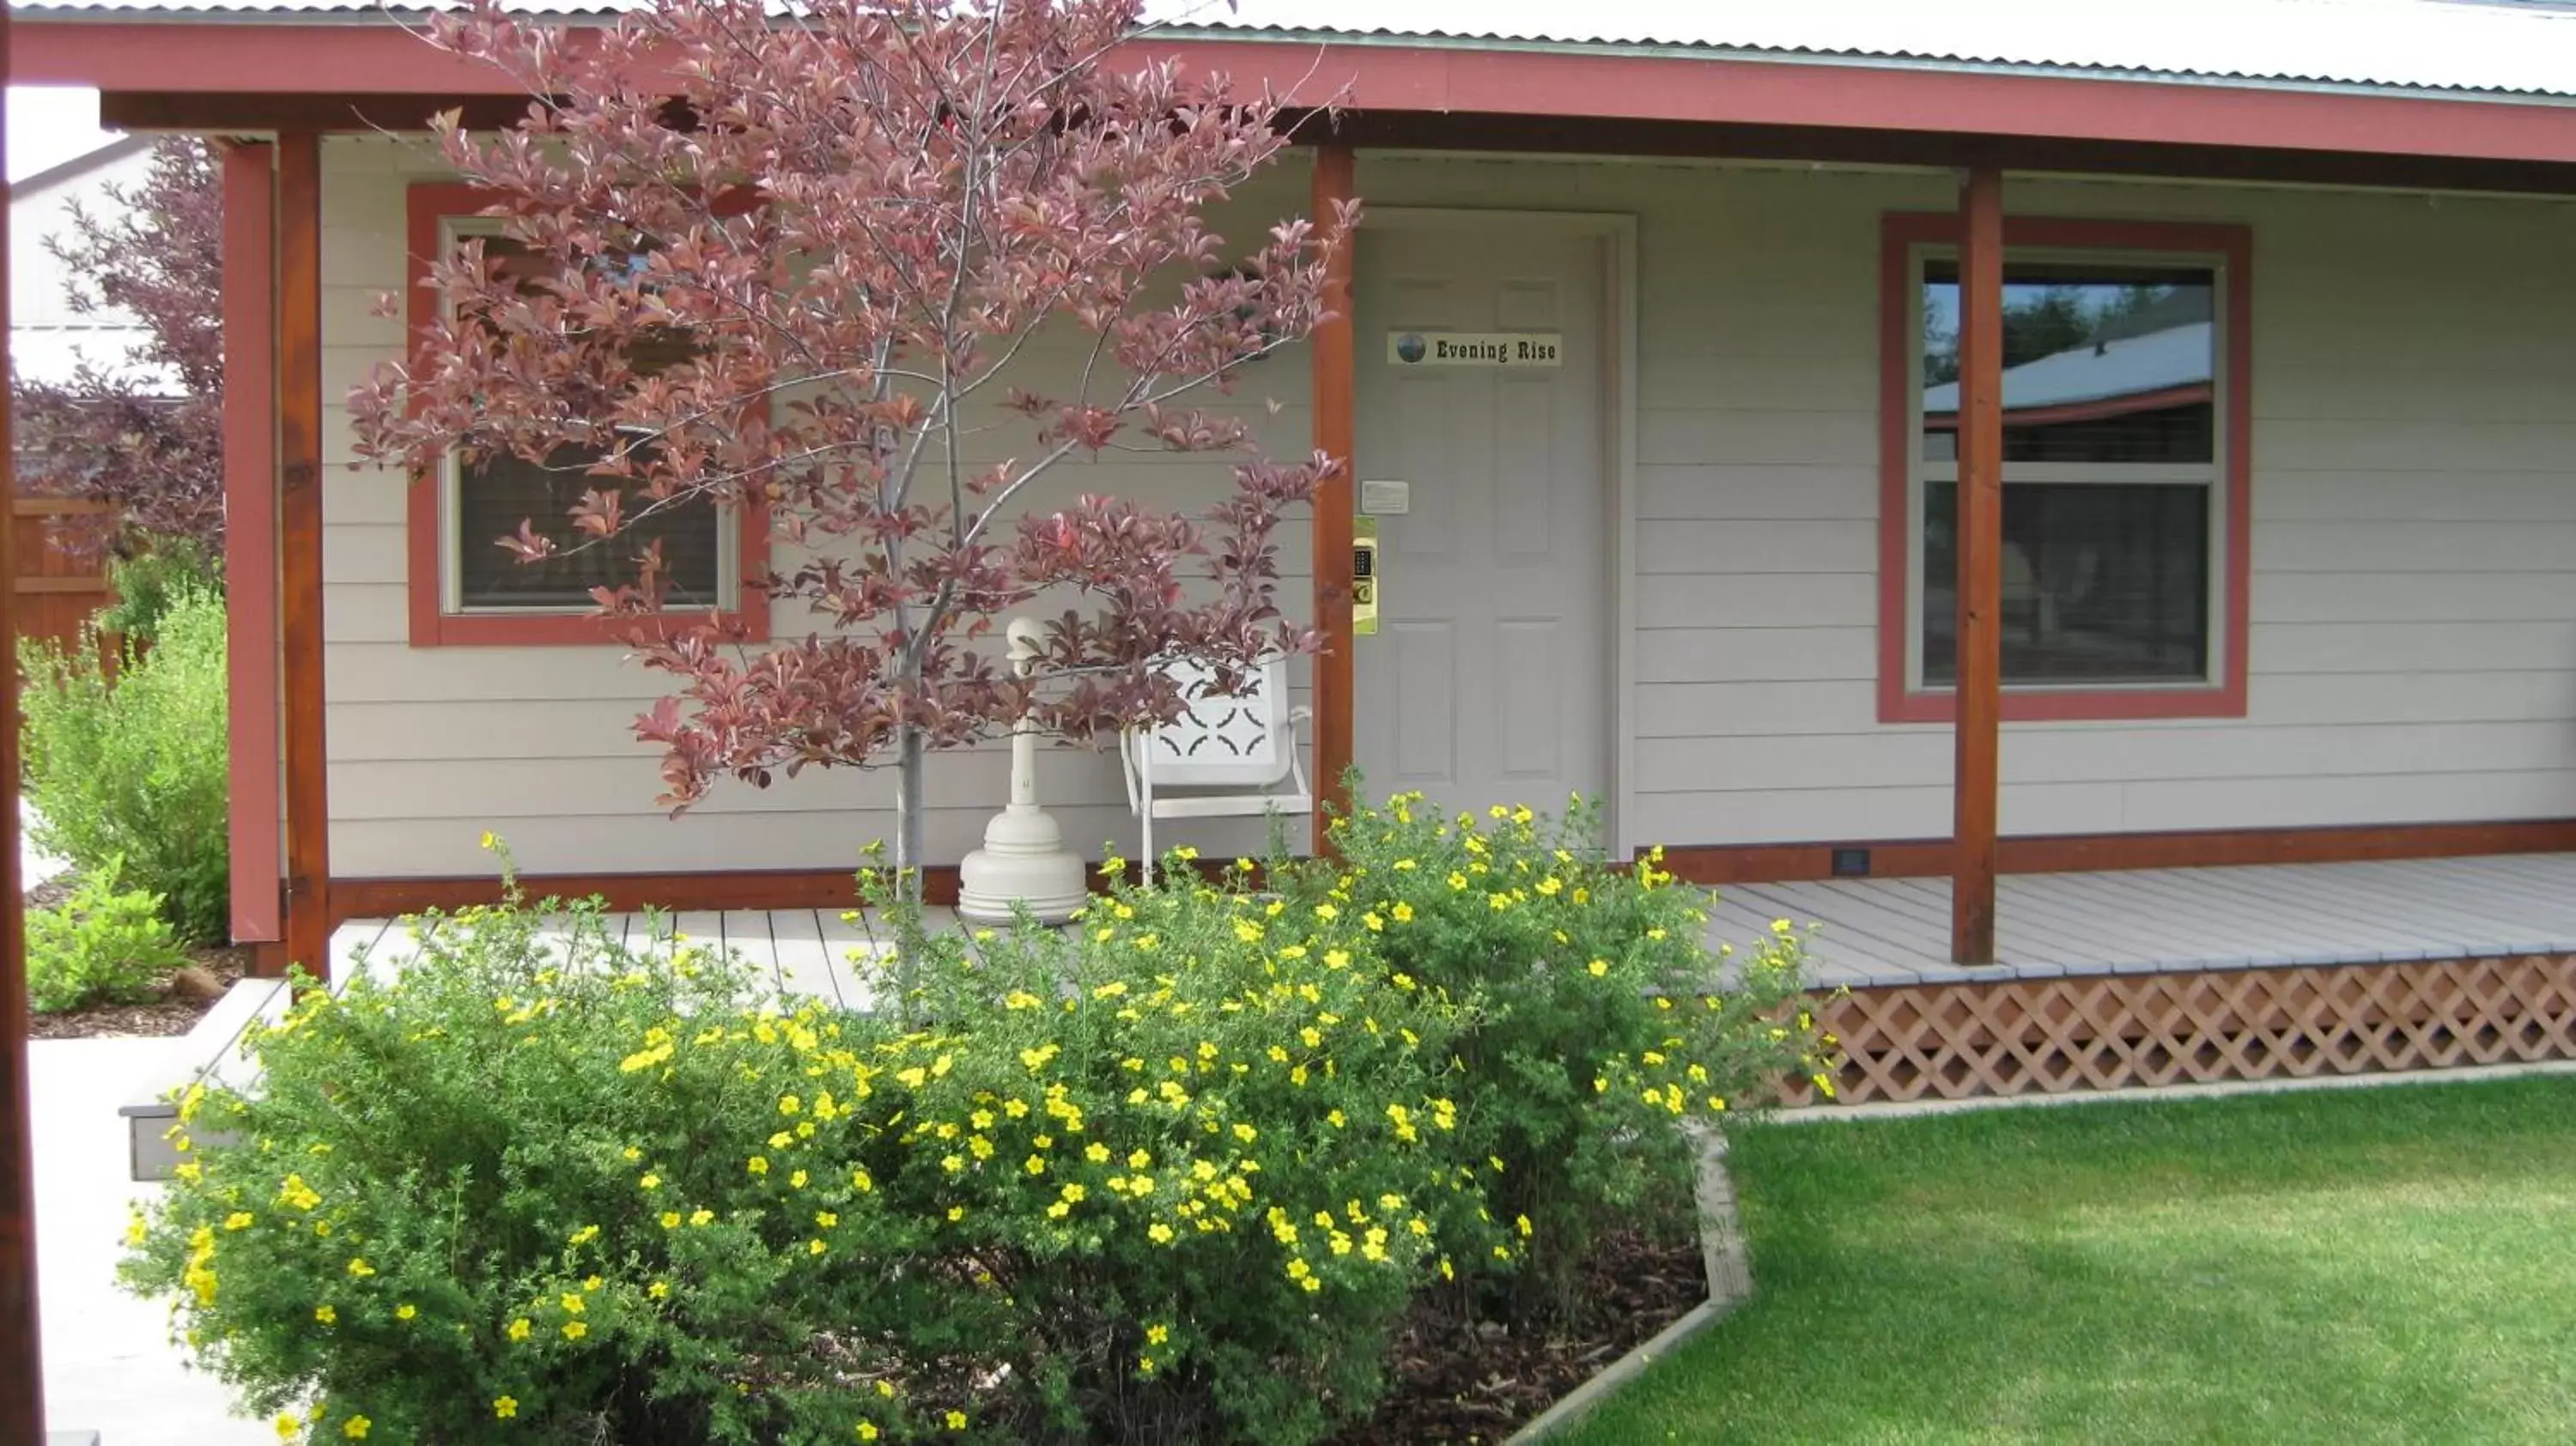 Property building, Garden in Pinedale Cozy Cabins